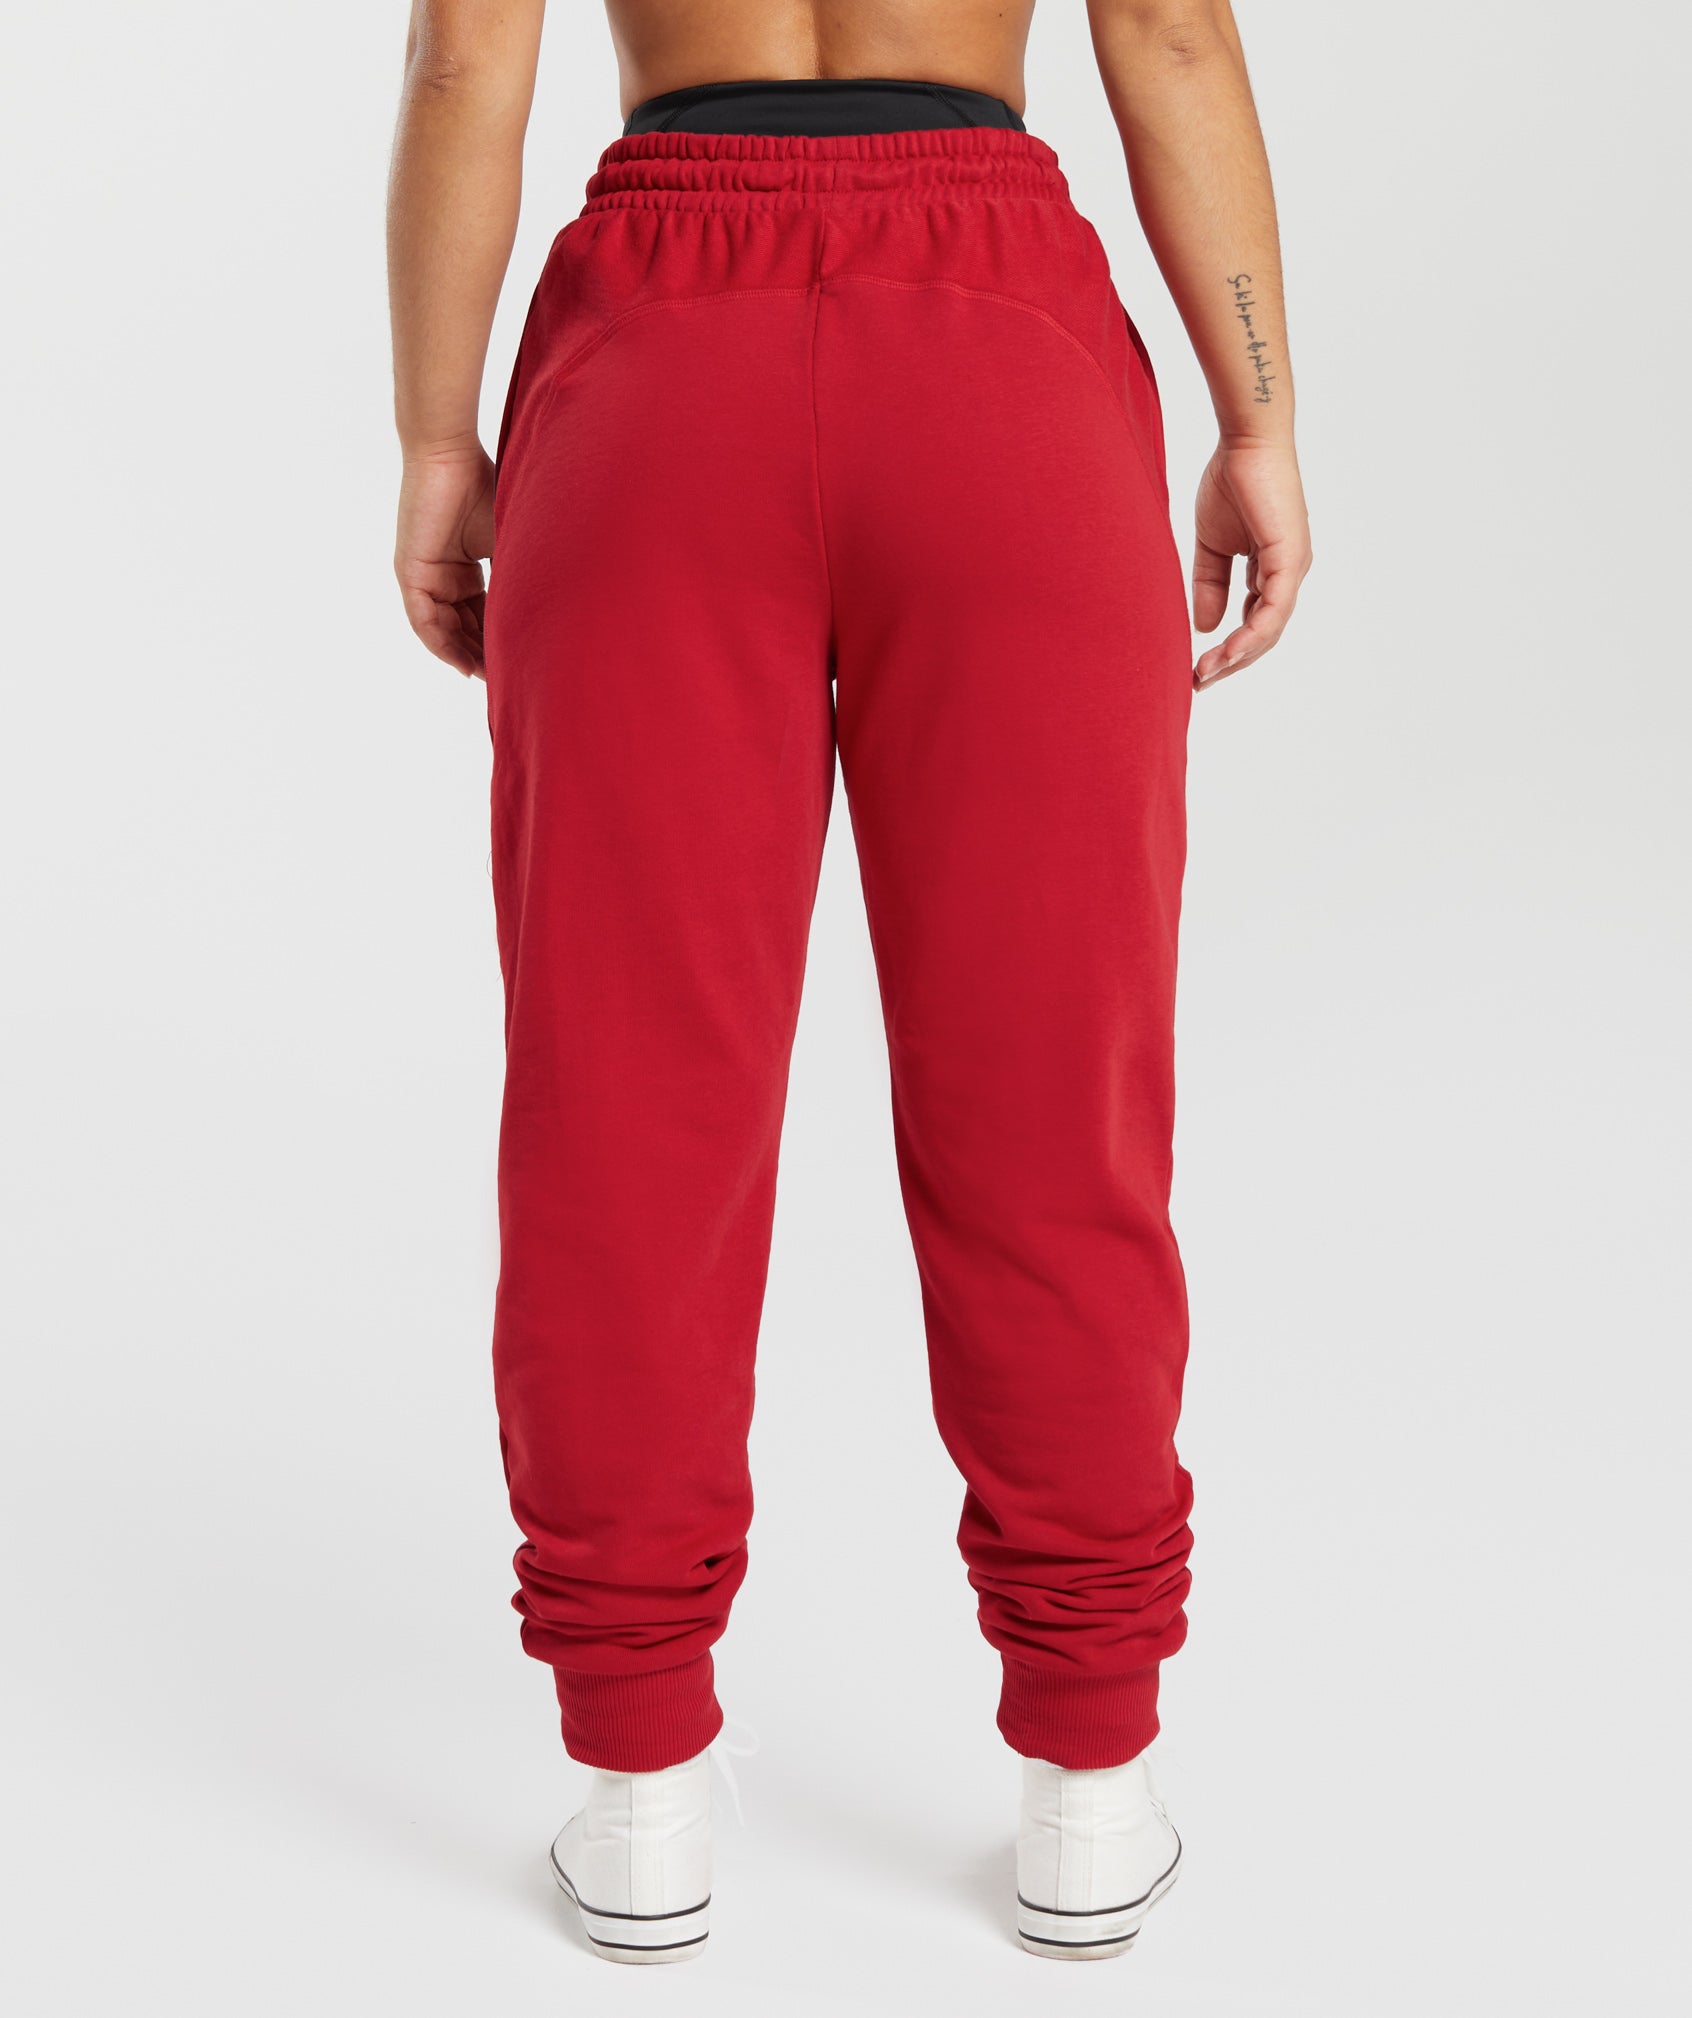 Gymshark GS Power Joggers - Red